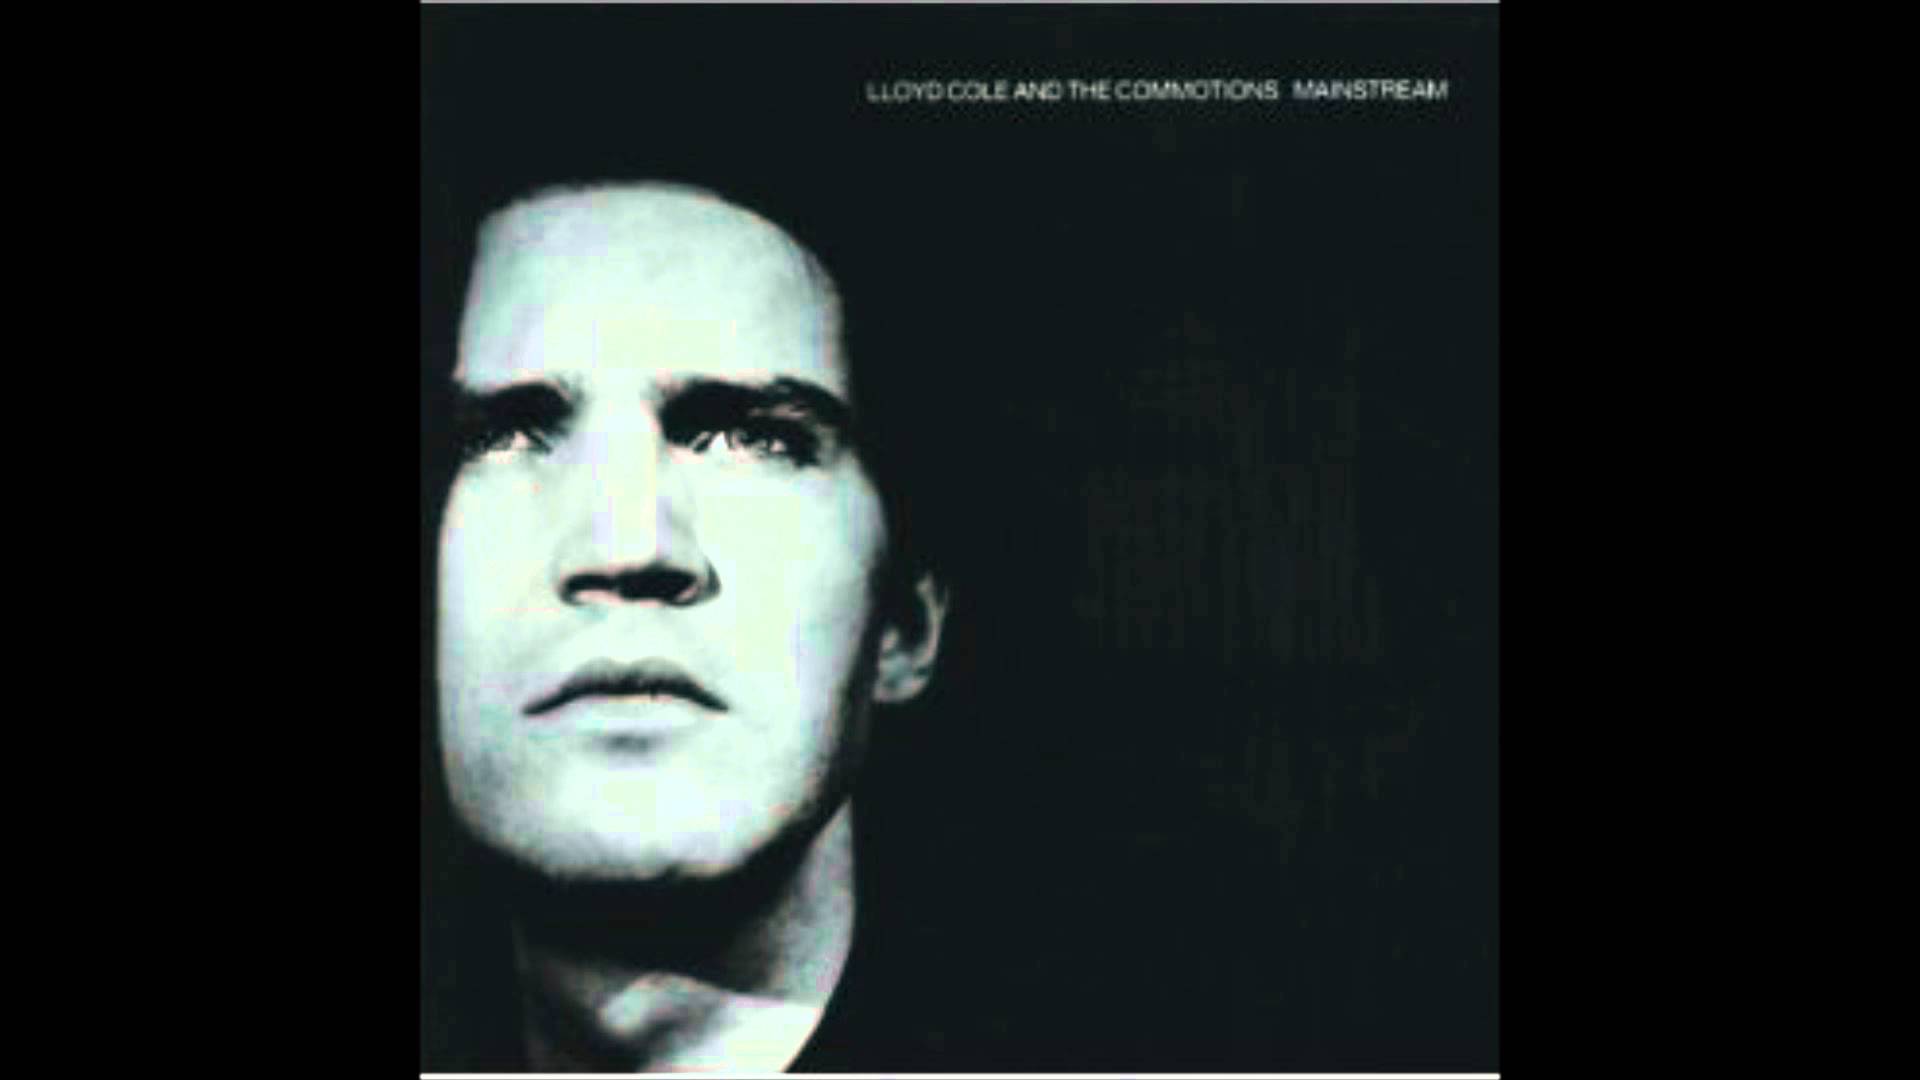 The Witching Hour Sessions – Lloyd Cole and the Commotions